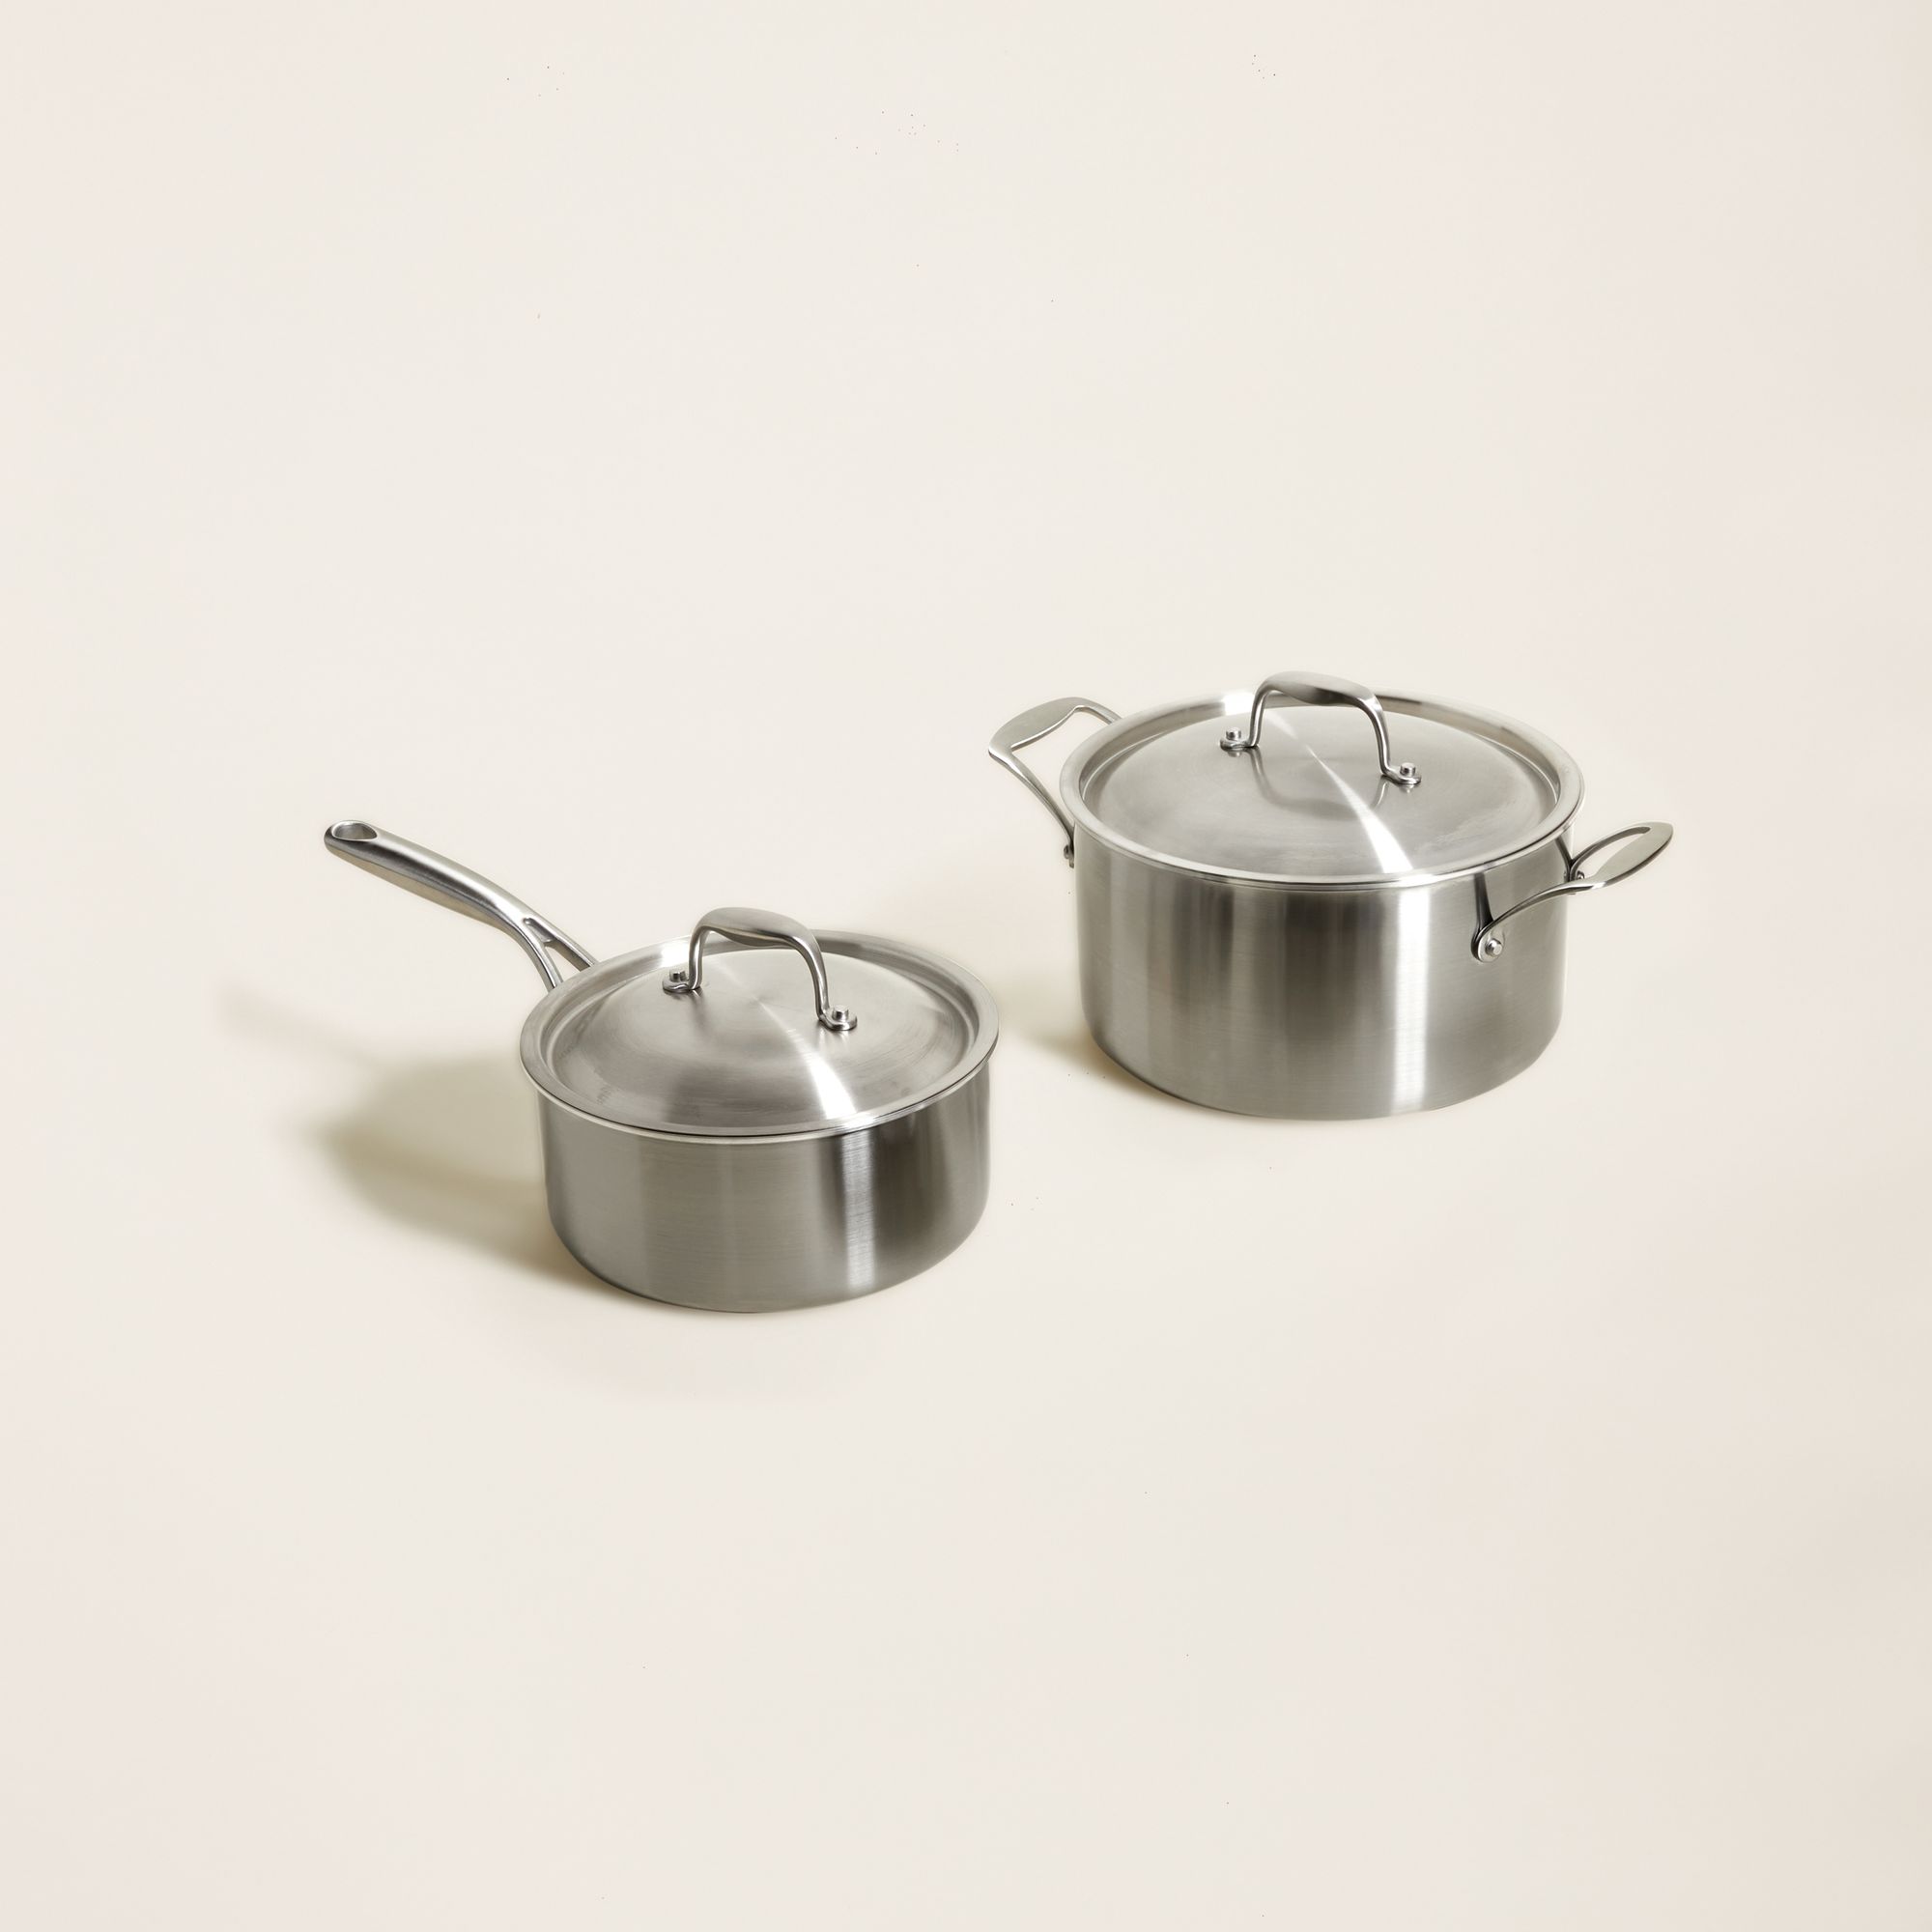 https://blog.italic.com/content/images/2023/03/Stainless-Steel-Cookware_A_0093_Edited--1-.jpg